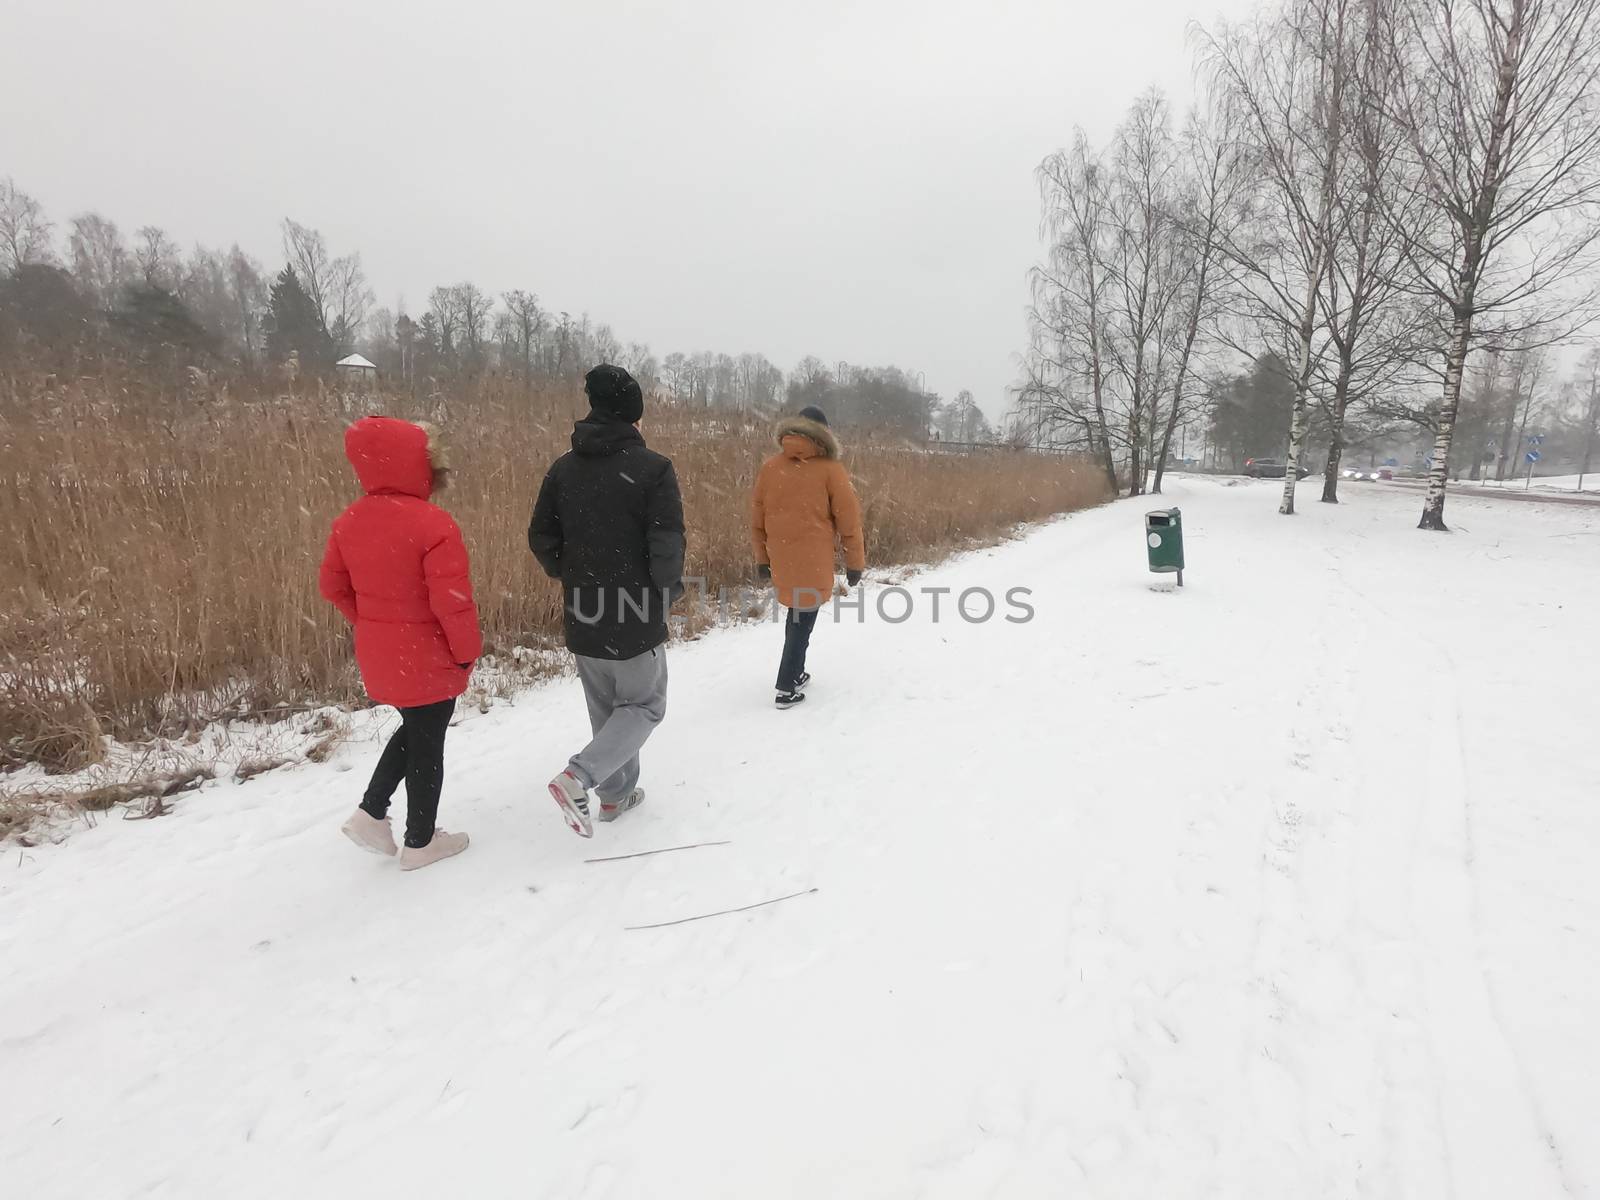 People have walked at a nature park during covid-19 pandemic soc by animagesdesign